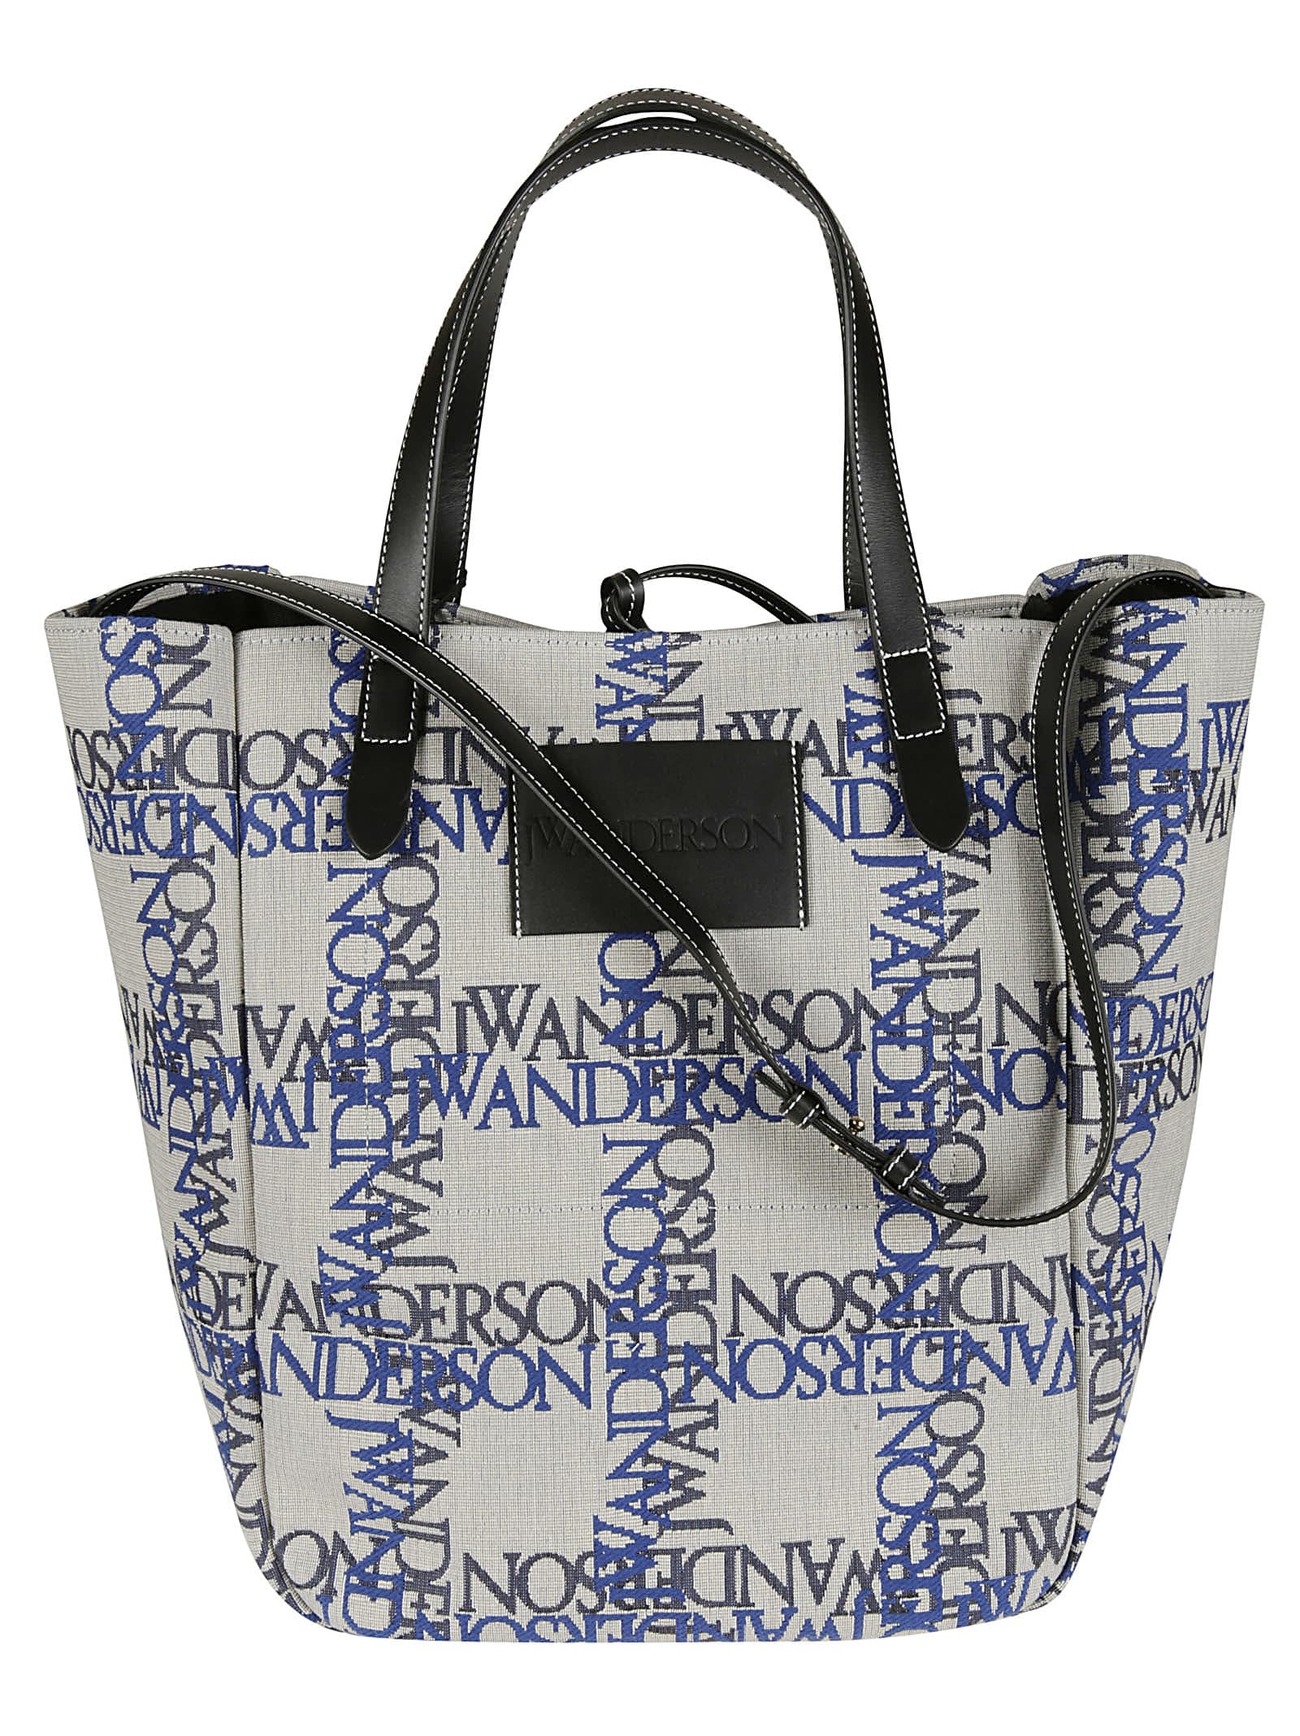 J.W. Anderson Cabas Belt Tote in black / white